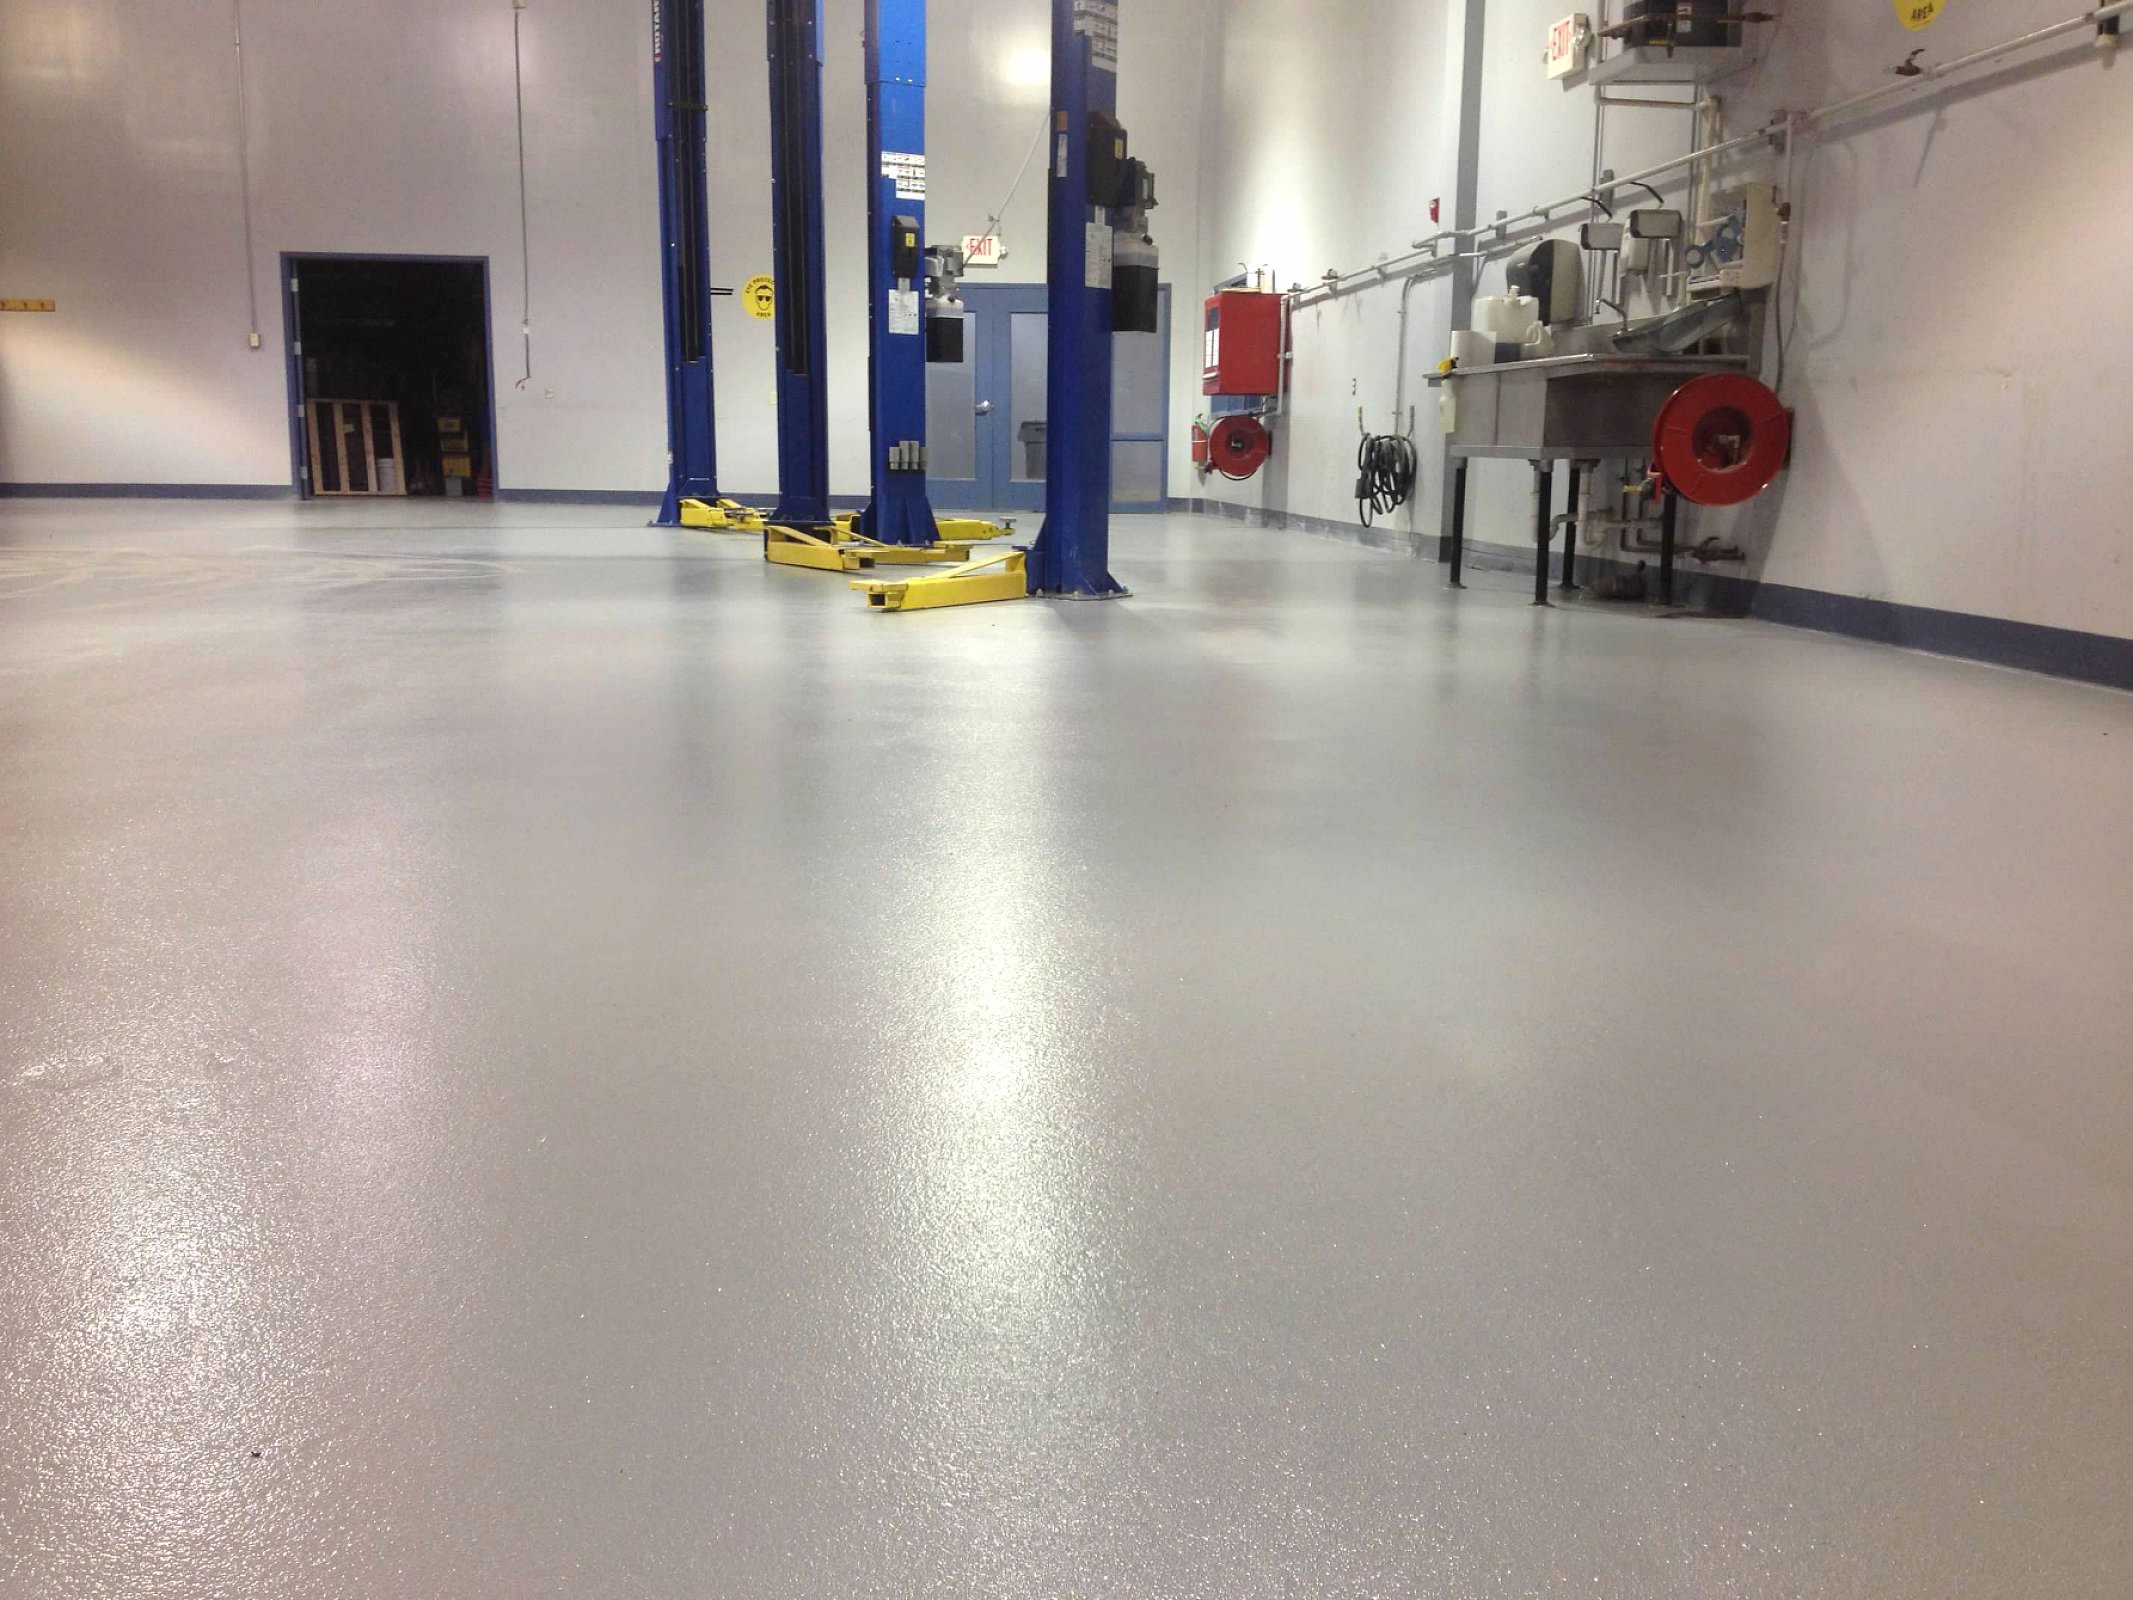 Coated floor with large car jacks and a sink in the background